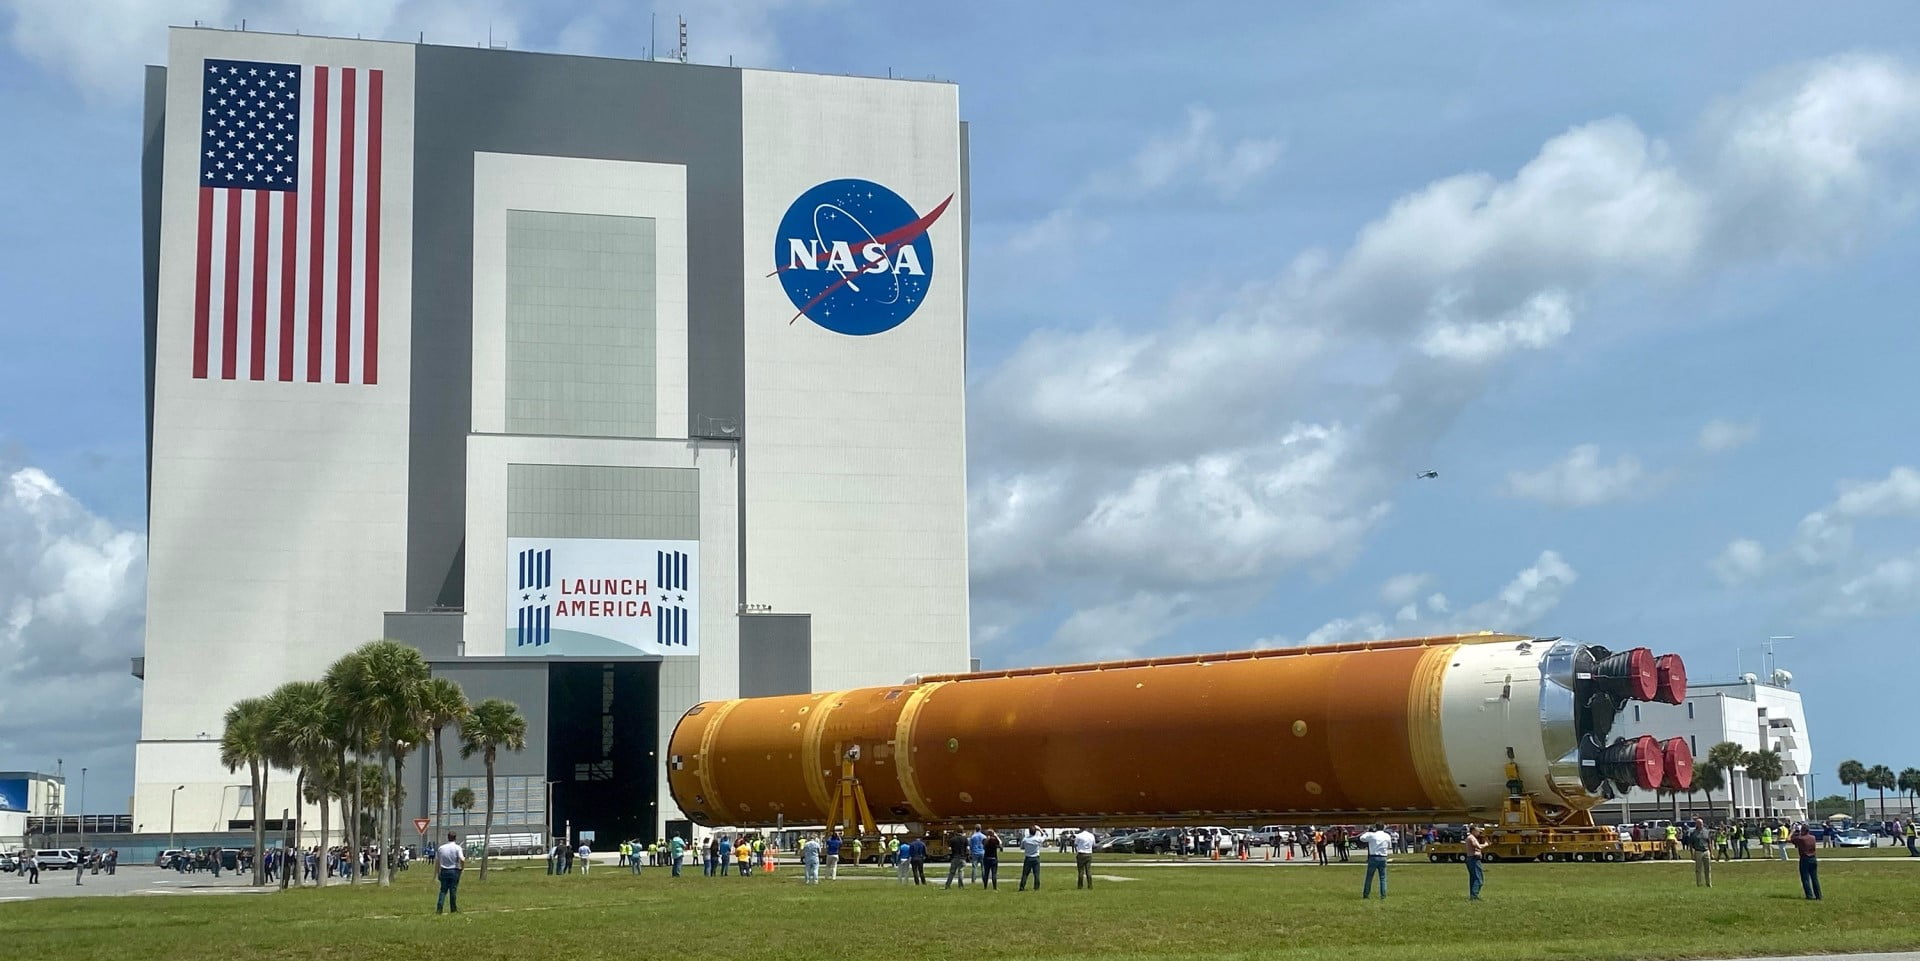 TOP 5 Most Notable US Rocket Launch Sites with Long History